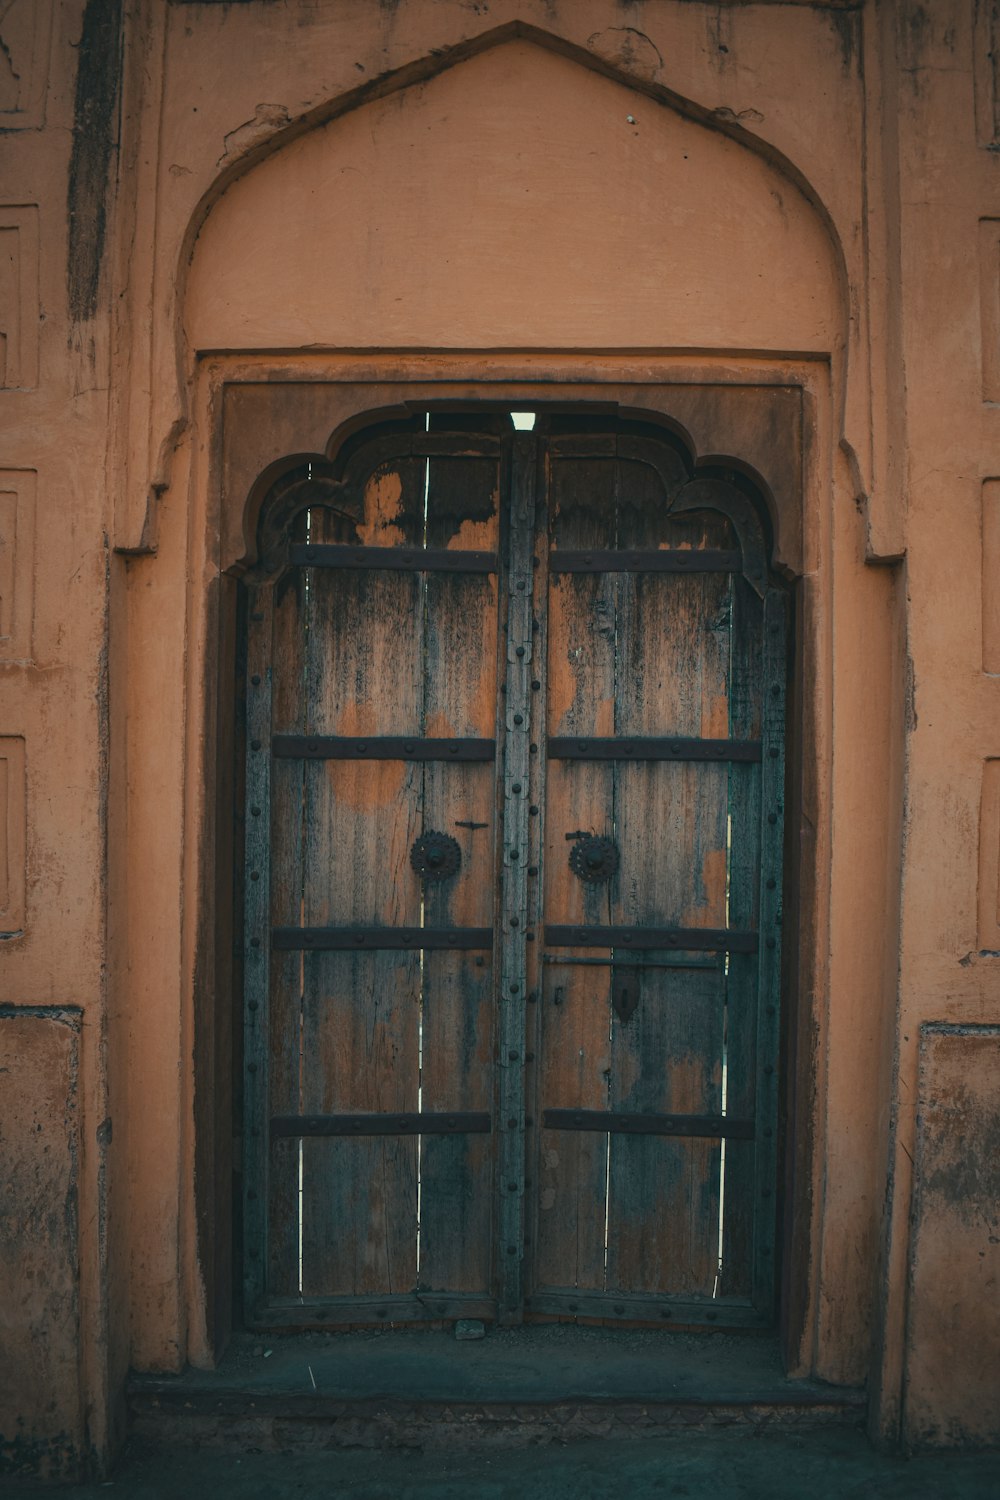 an old wooden door with iron bars on it